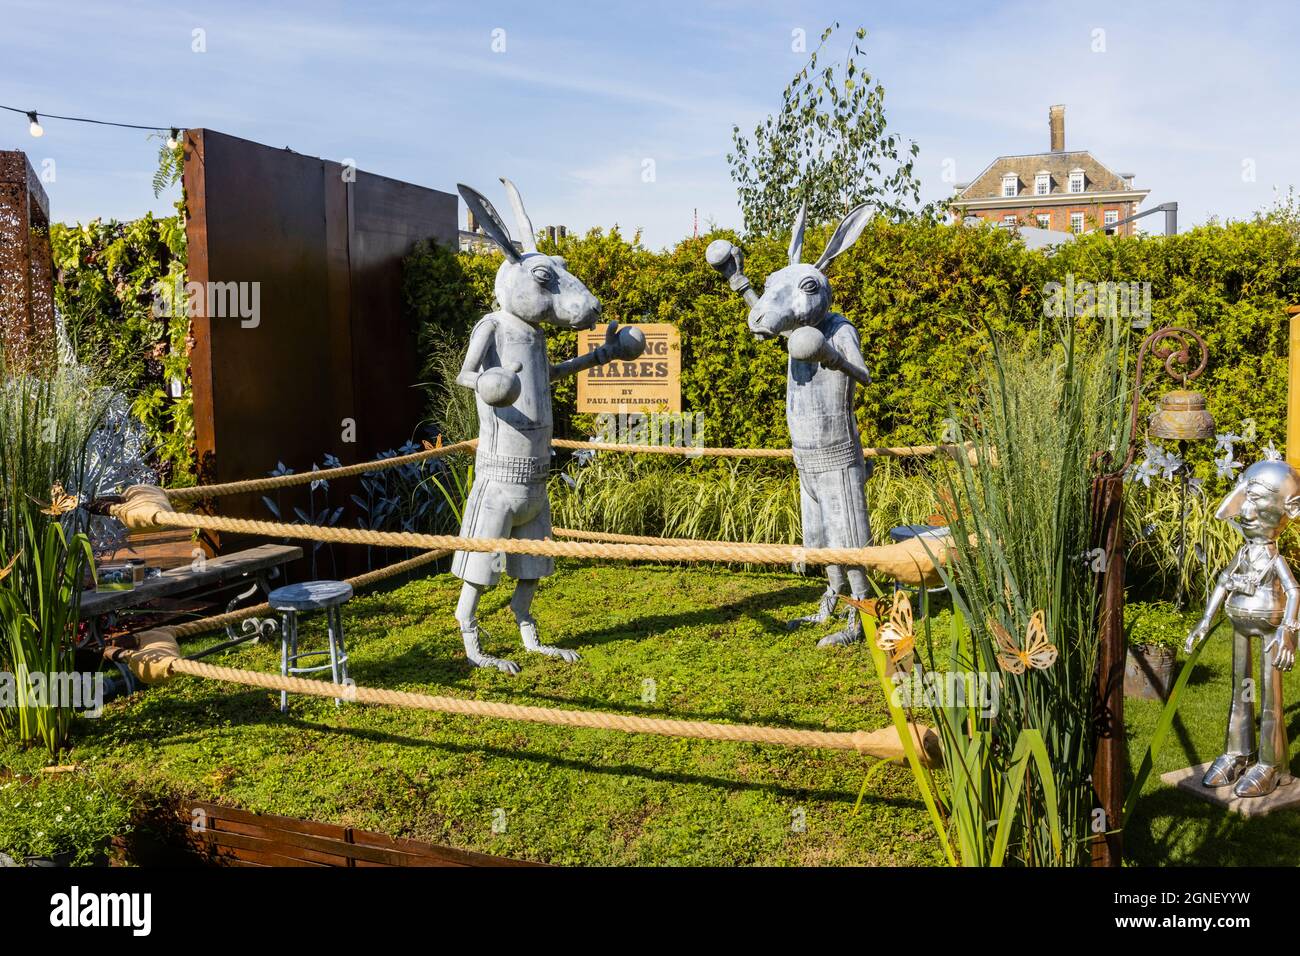 Boxing Hares steel sculptures by Paul Richardson at Chelsea Flower Show held in the grounds of the Royal Hospital Chelsea London SW3 in September 2021 Stock Photo